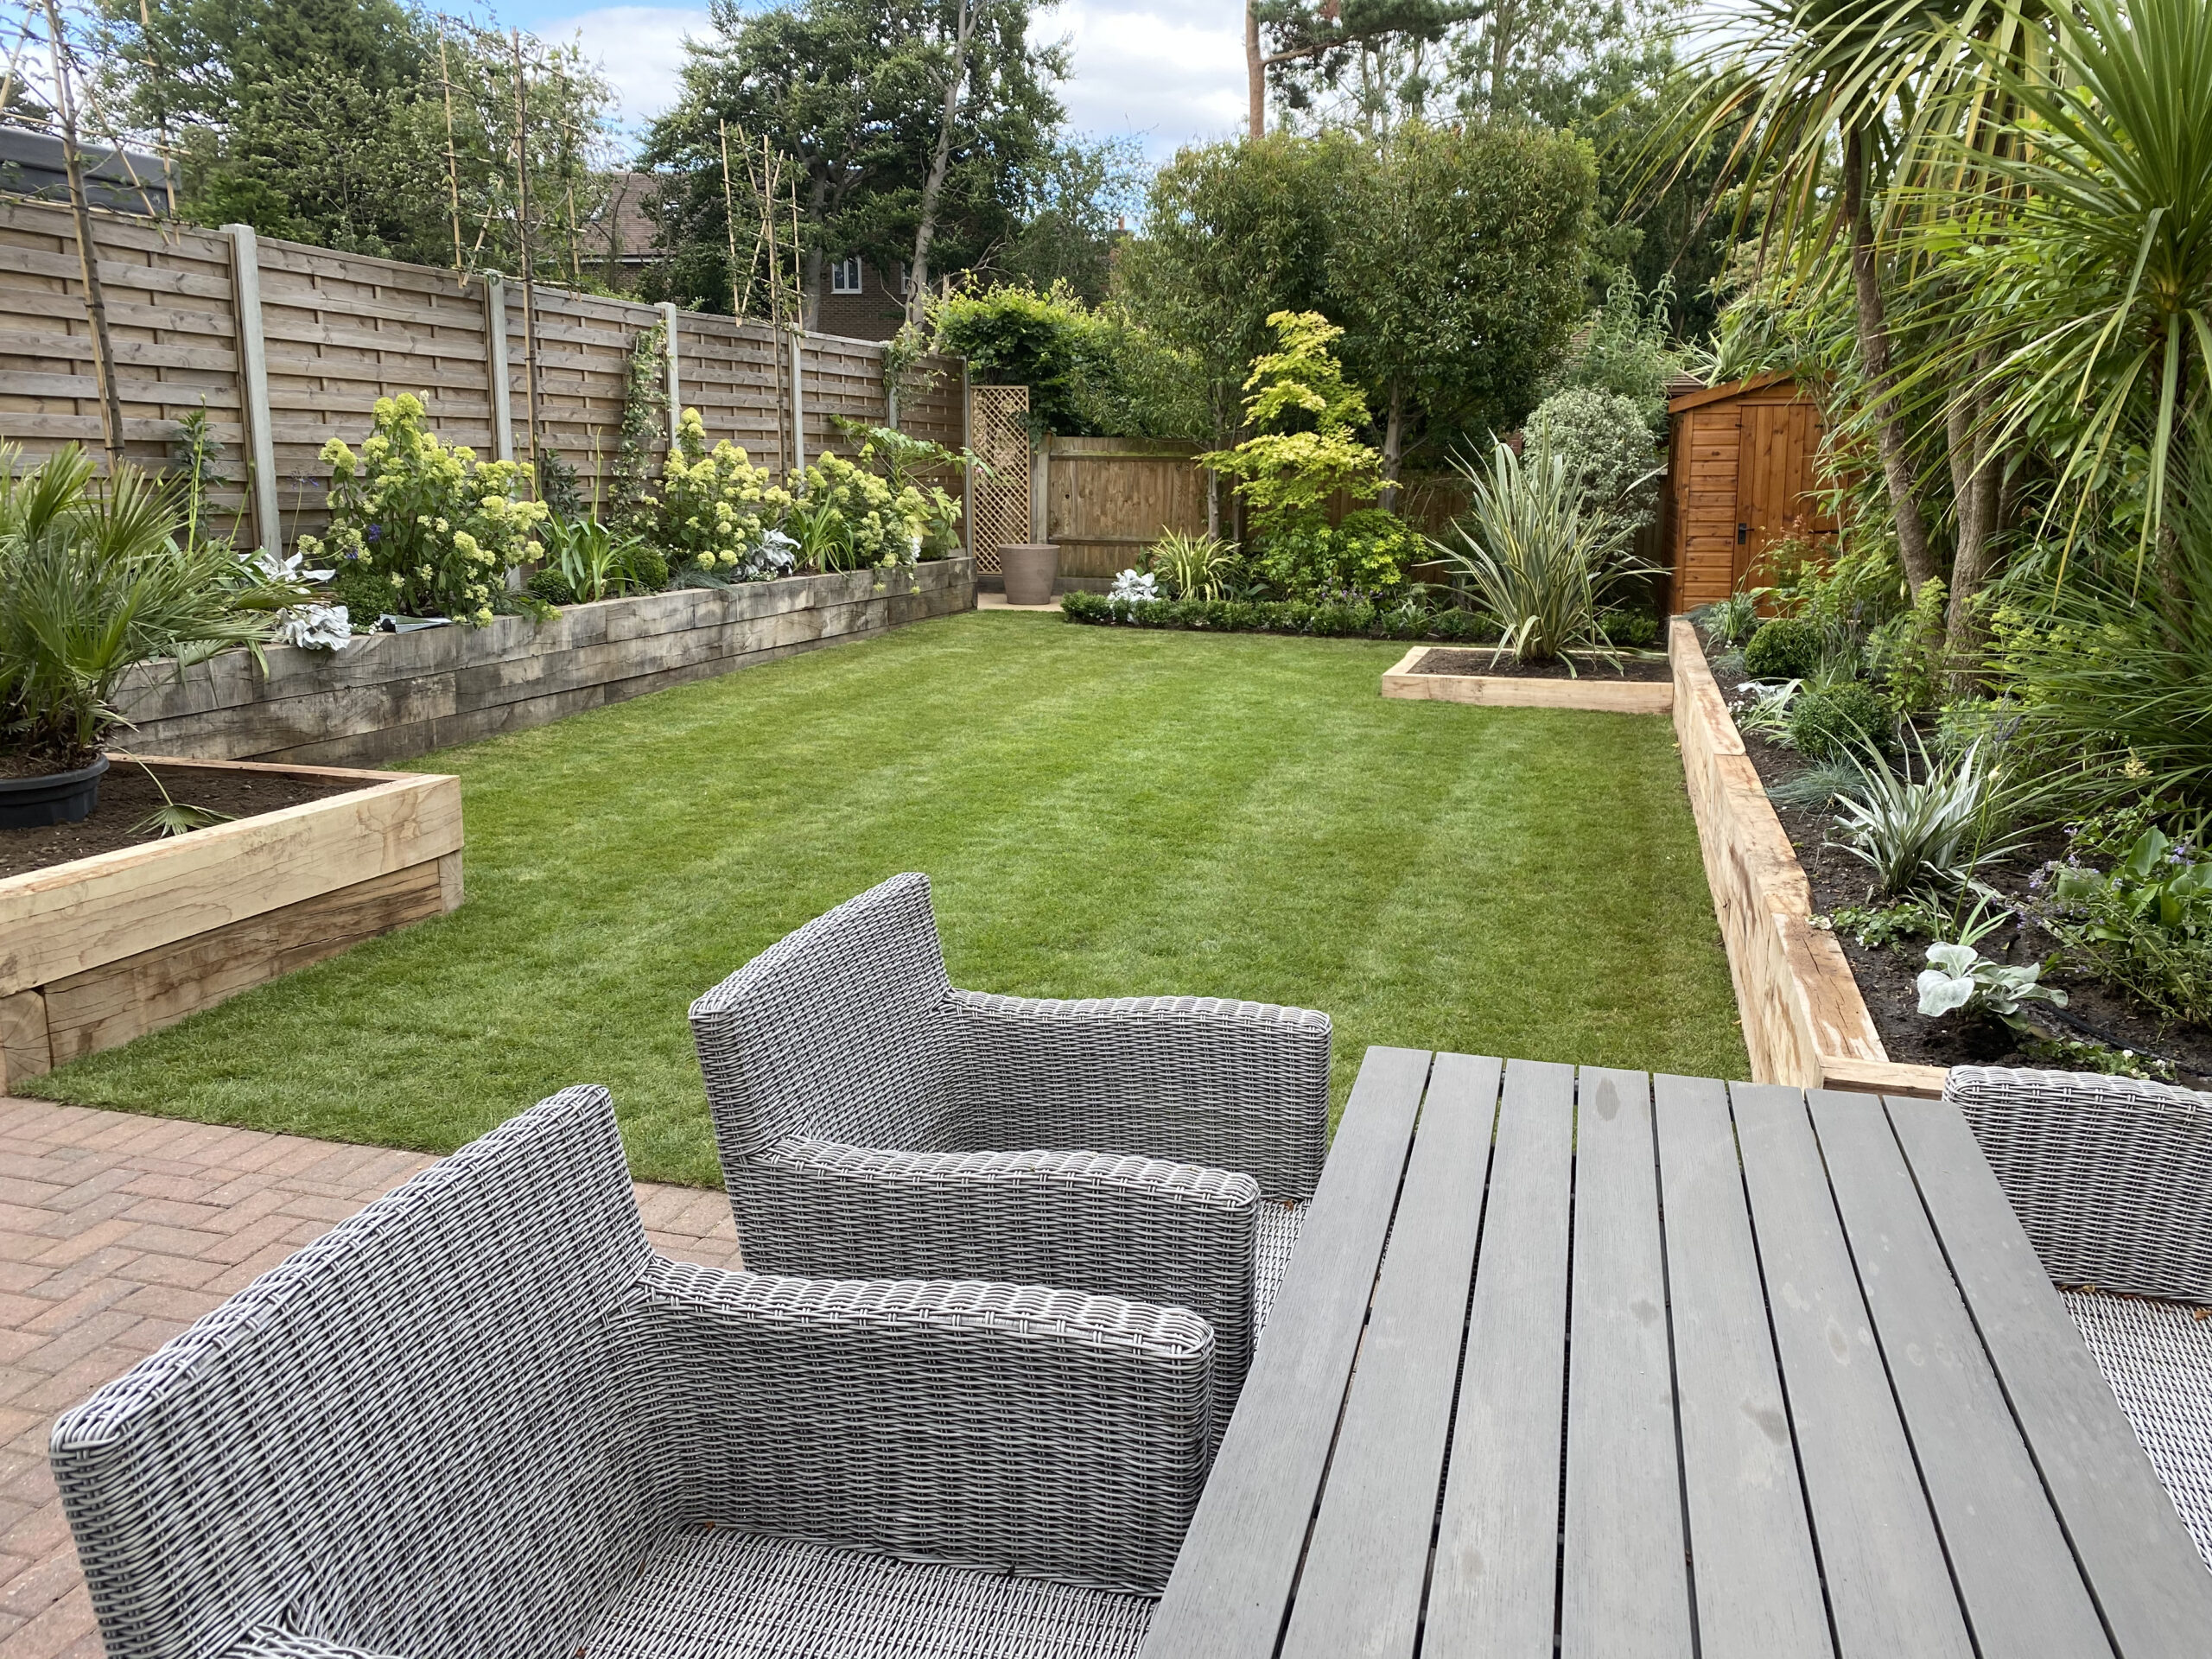 A brick tiled patio with rattan armchairs around a garden table leading out into a well-maintained garden law surrounded by wooden box planters designed by Willow Alexander